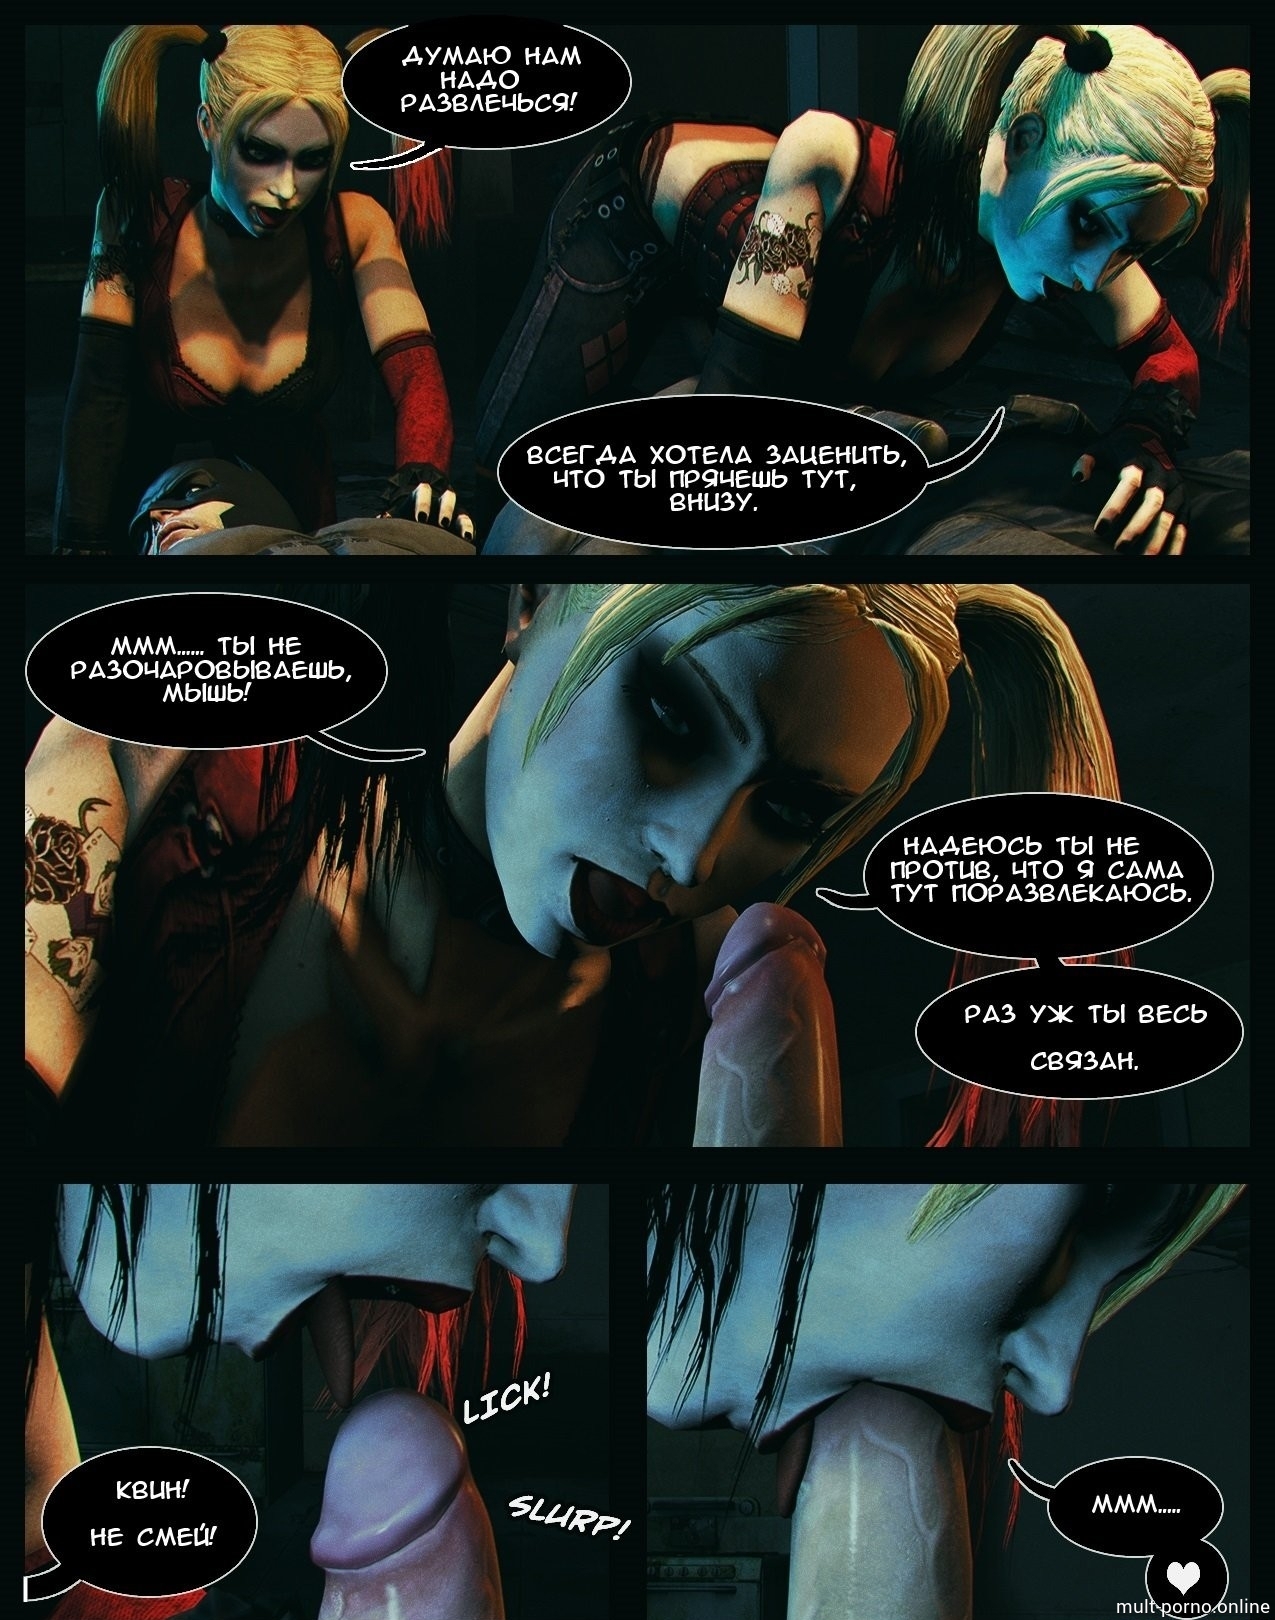 Harley Quinn likes to fuck both girls and guys (+porn comics)